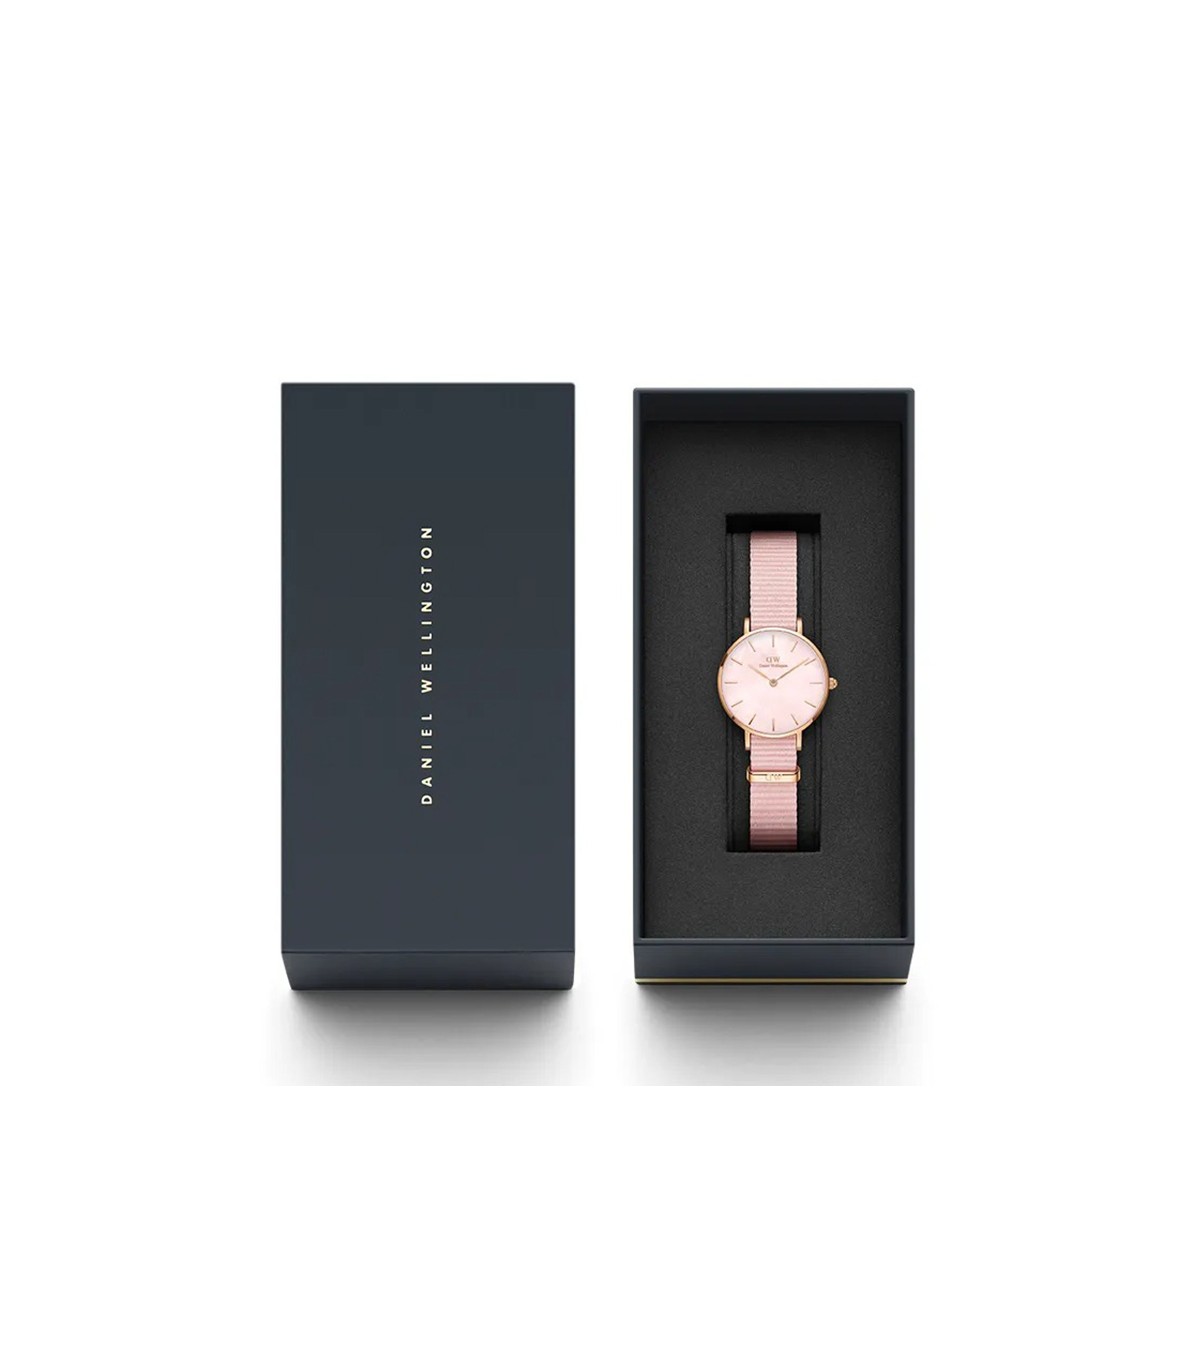 Daniel Wellington Woman's Watch - Petite Coral 28mm Pink Mother of